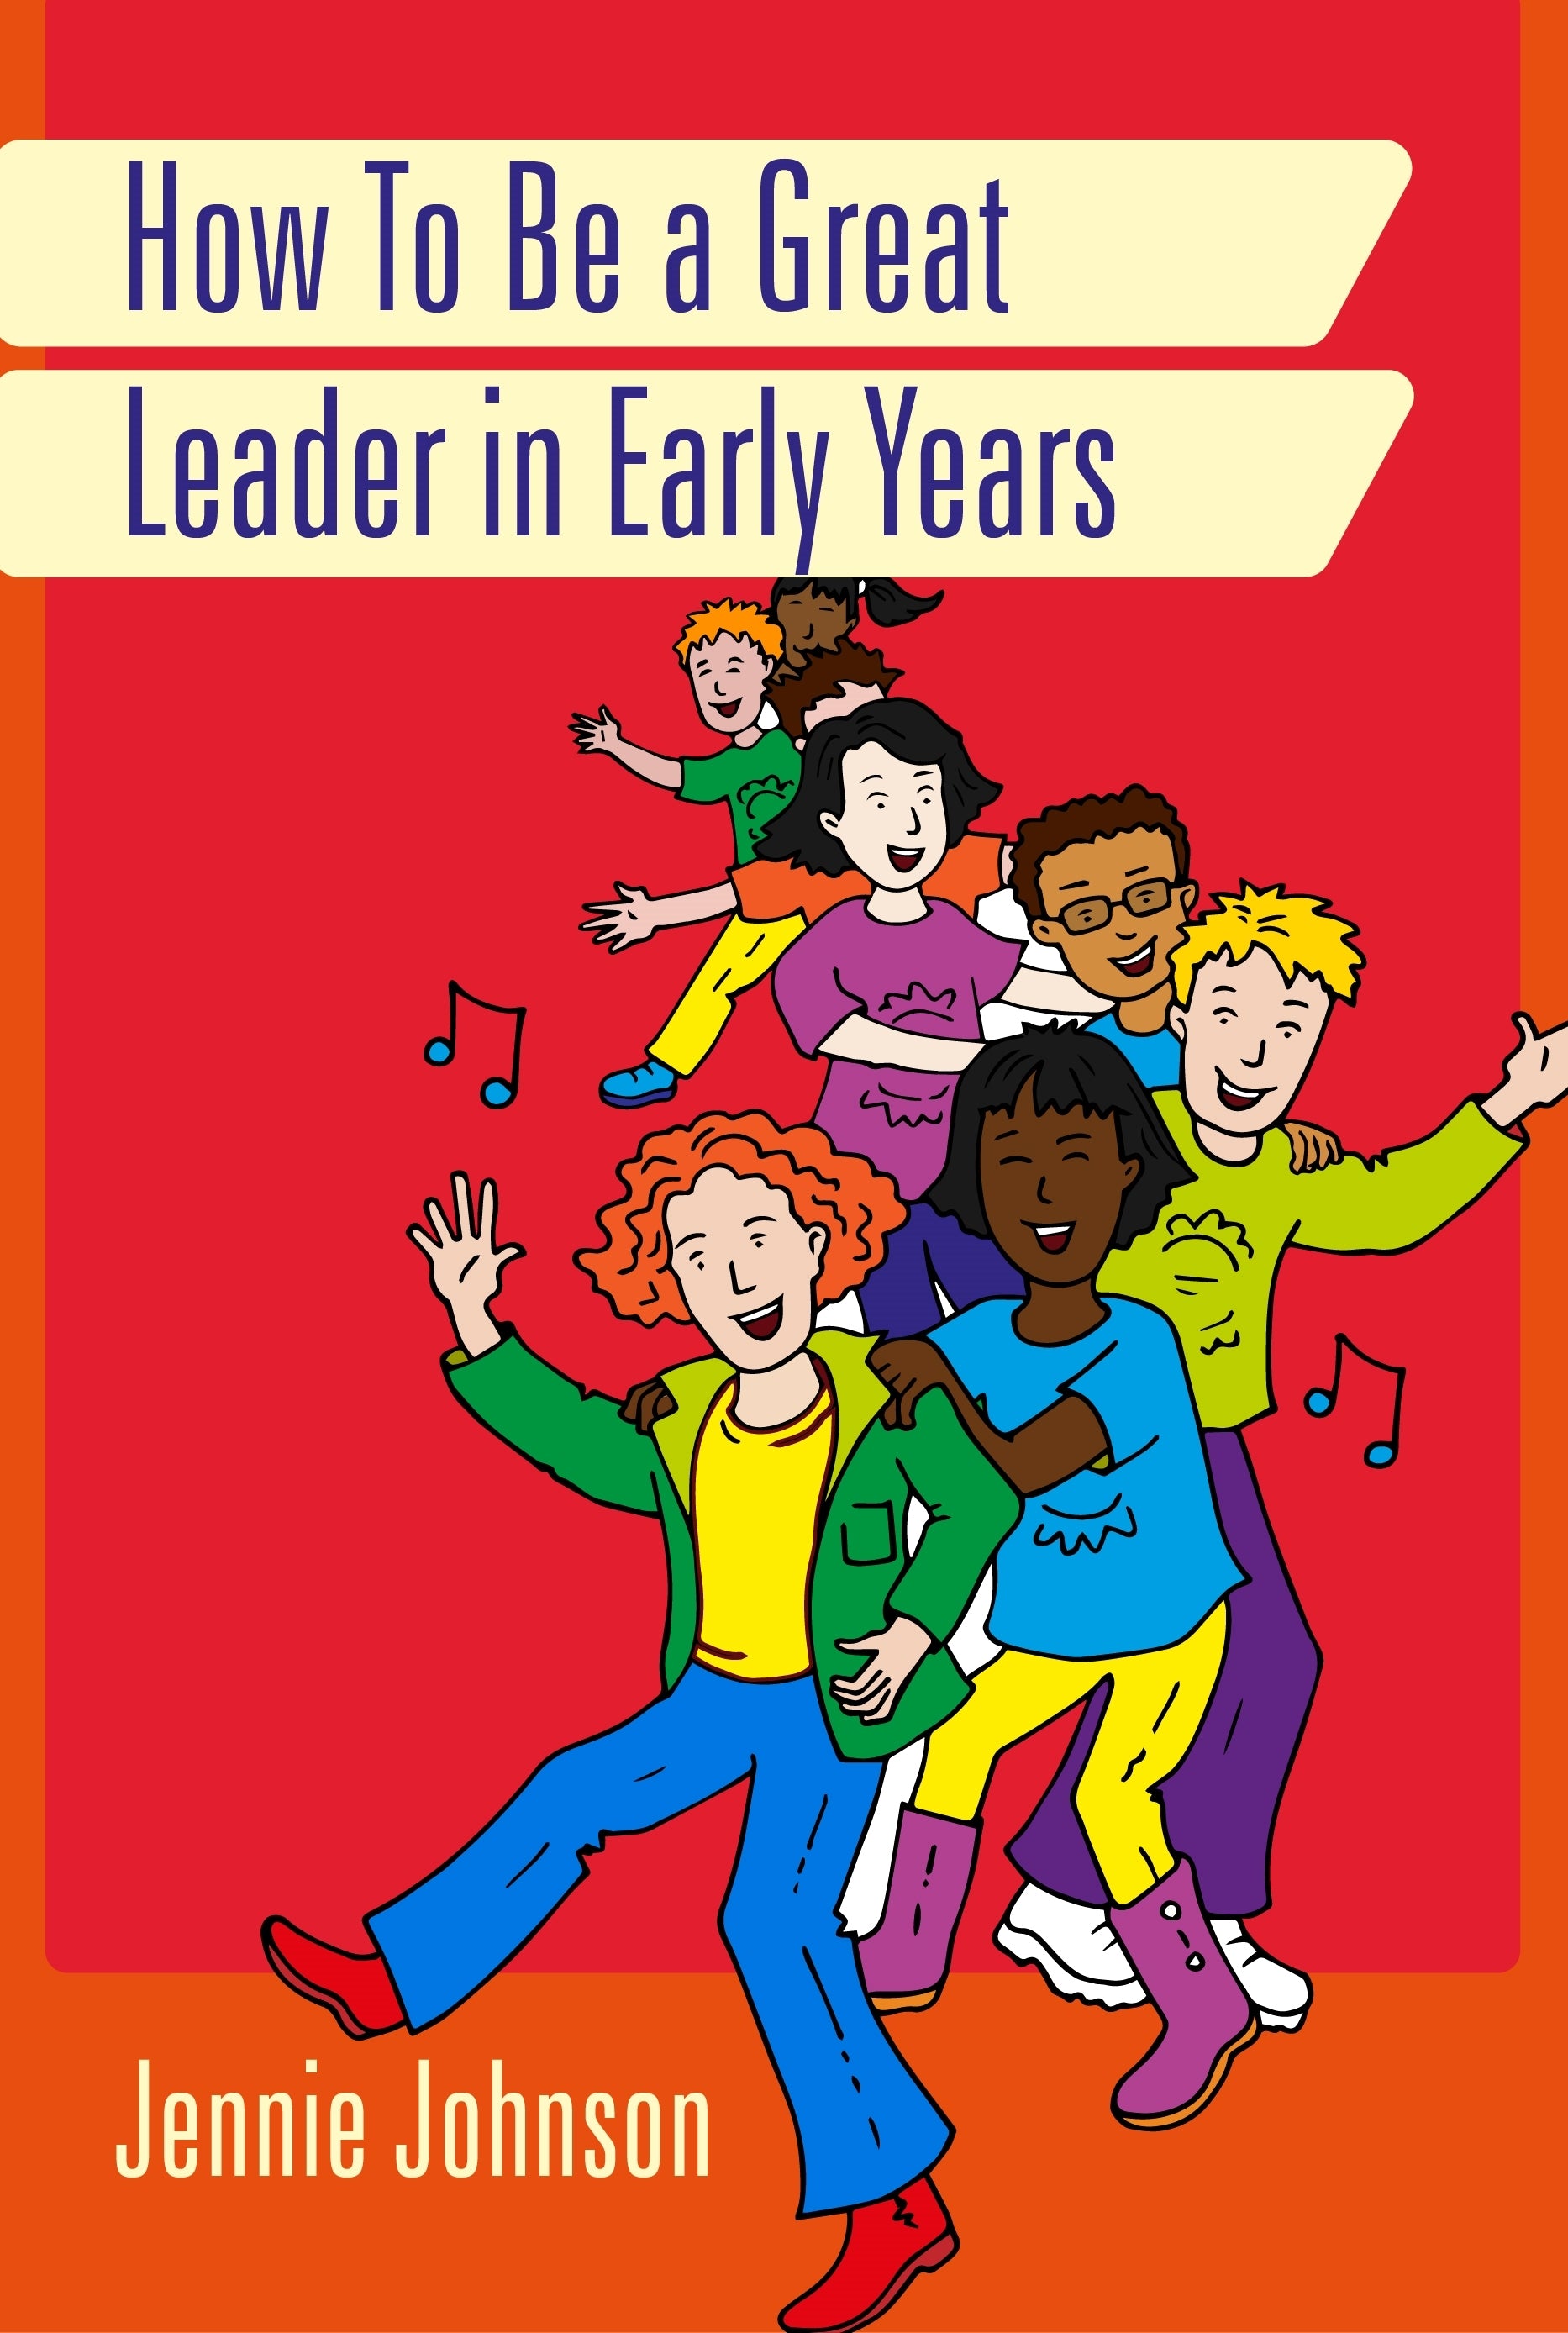 How to Be a Great Leader in Early Years by Jennie Johnson